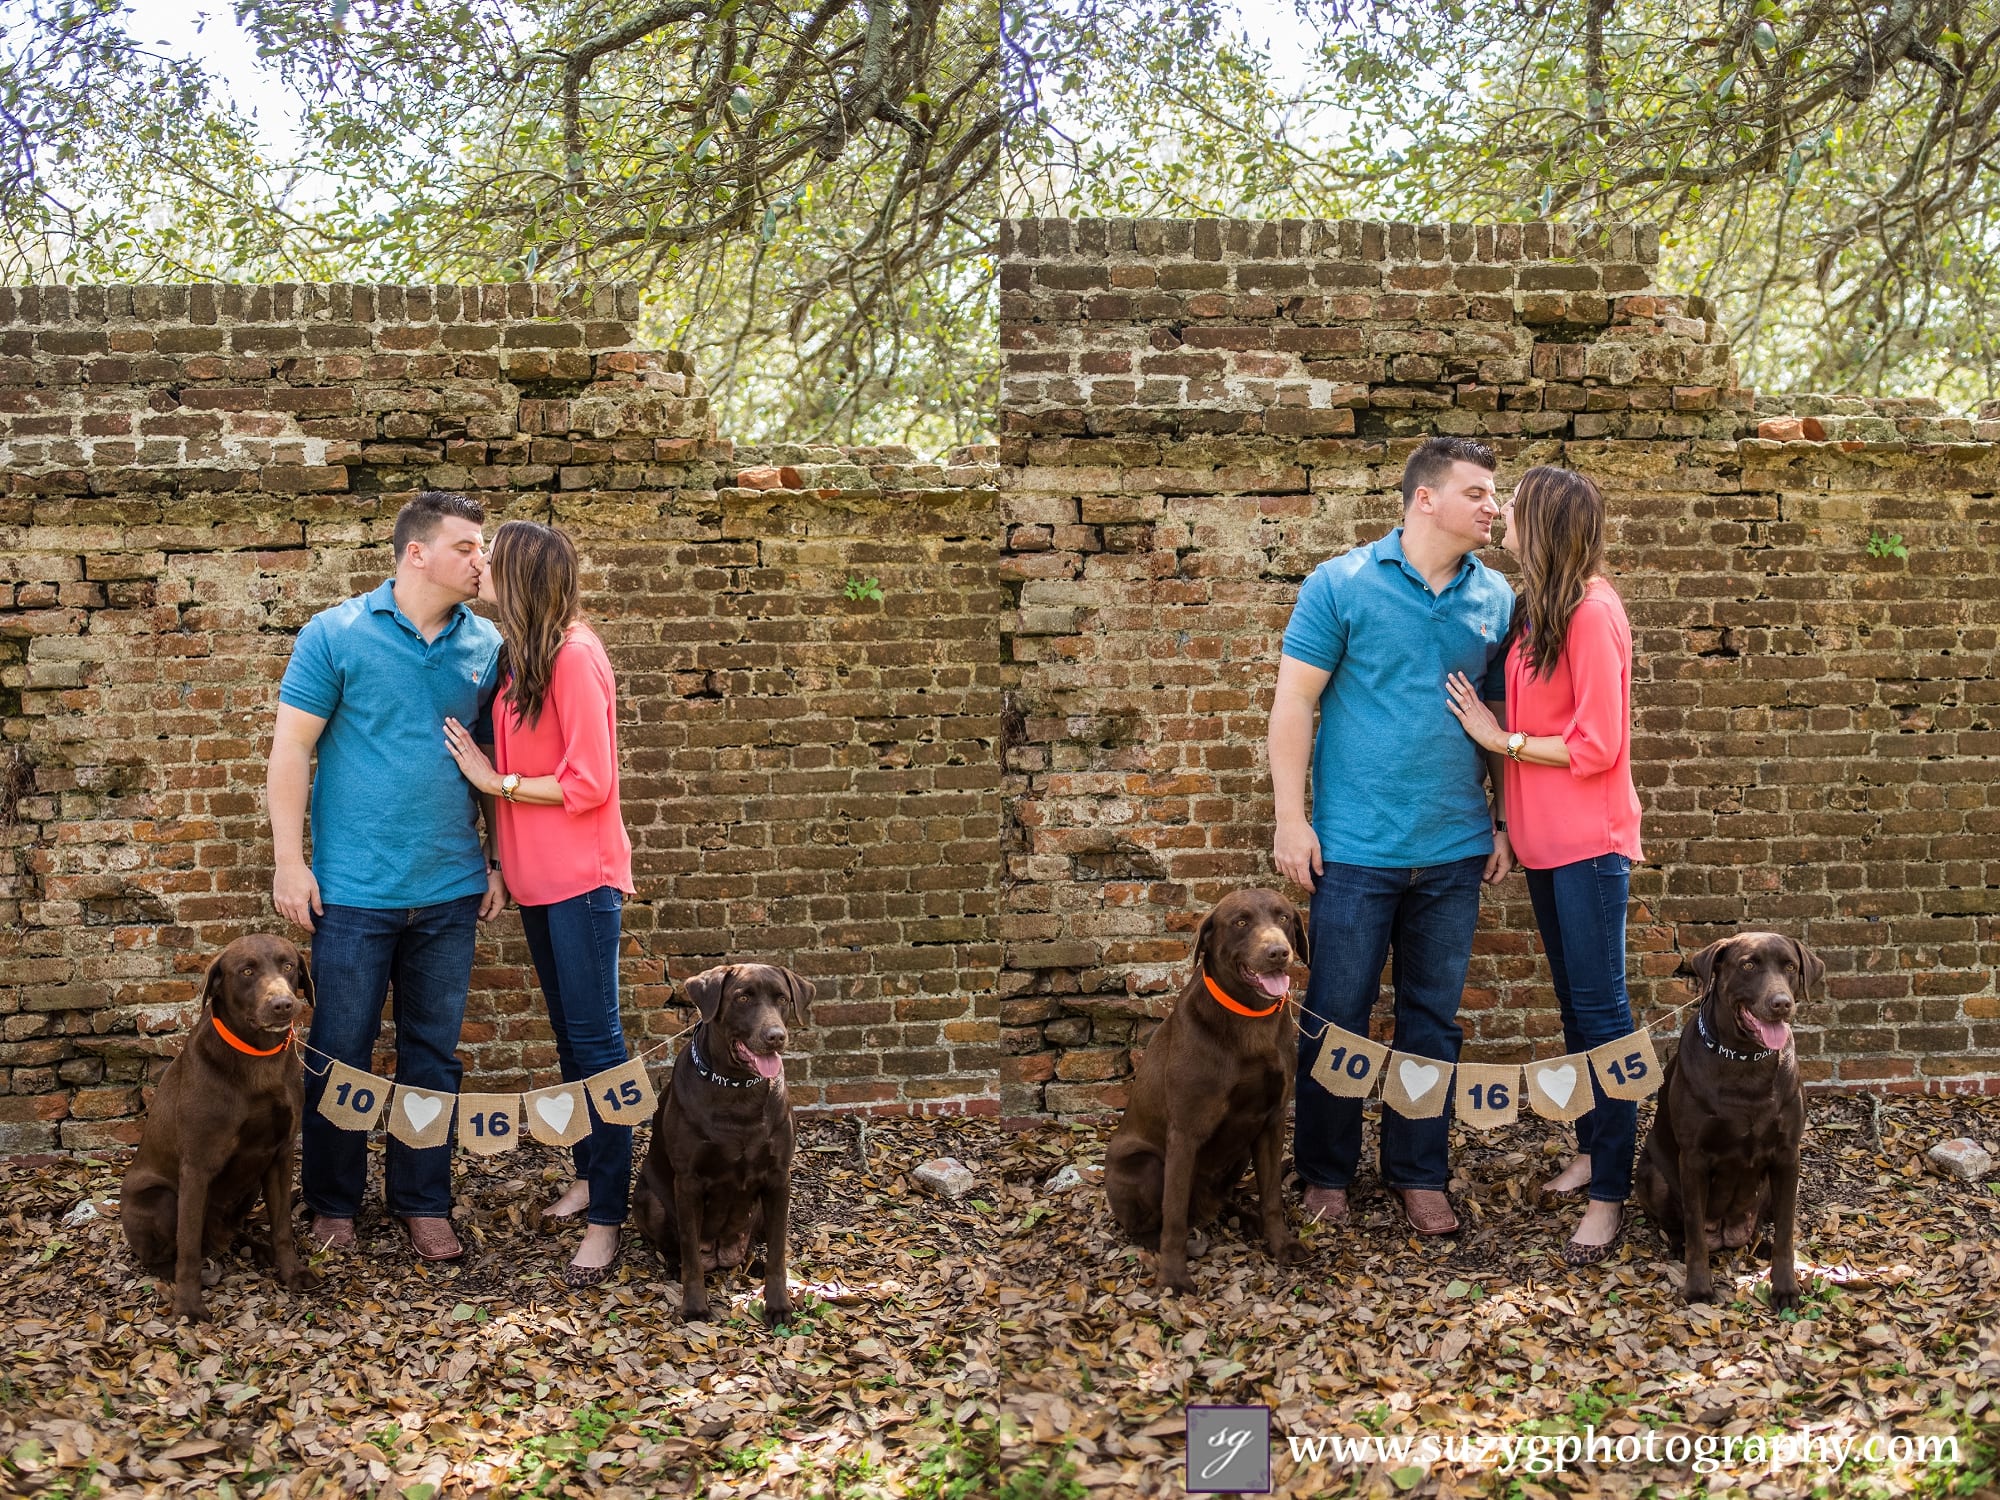 engagement photography-new orleans engagement photography-louisiana wedding photographer-wedding photography-suzy-g-photography-weddings_0005